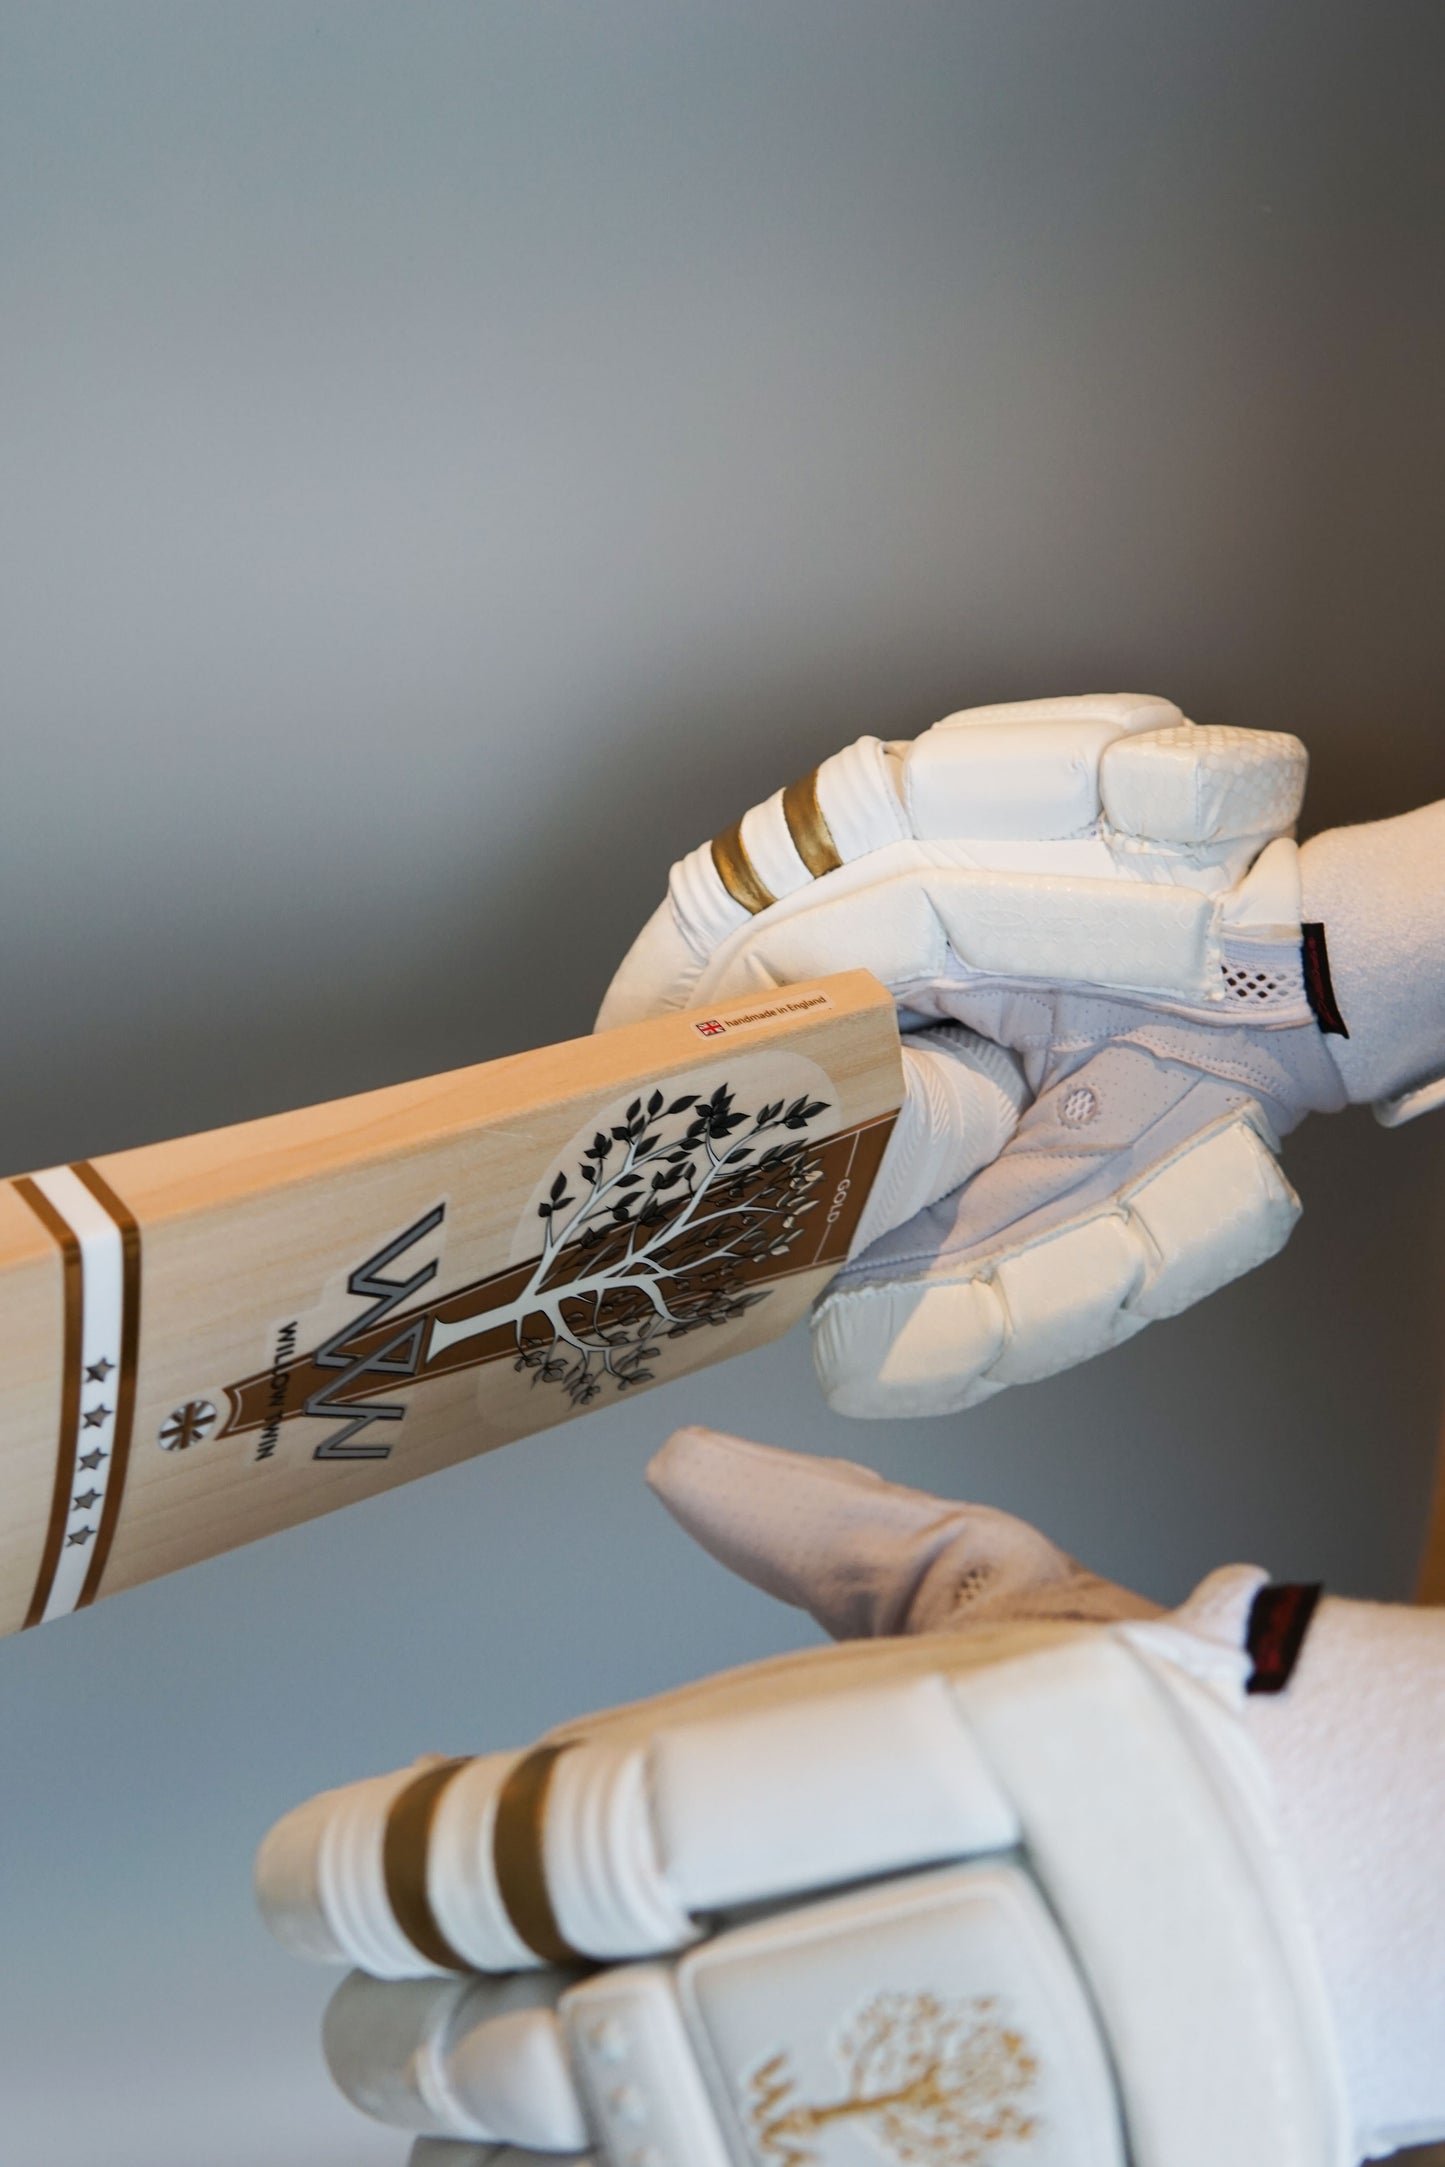 Willow Twin cricket batting gloves feature grip and protection.